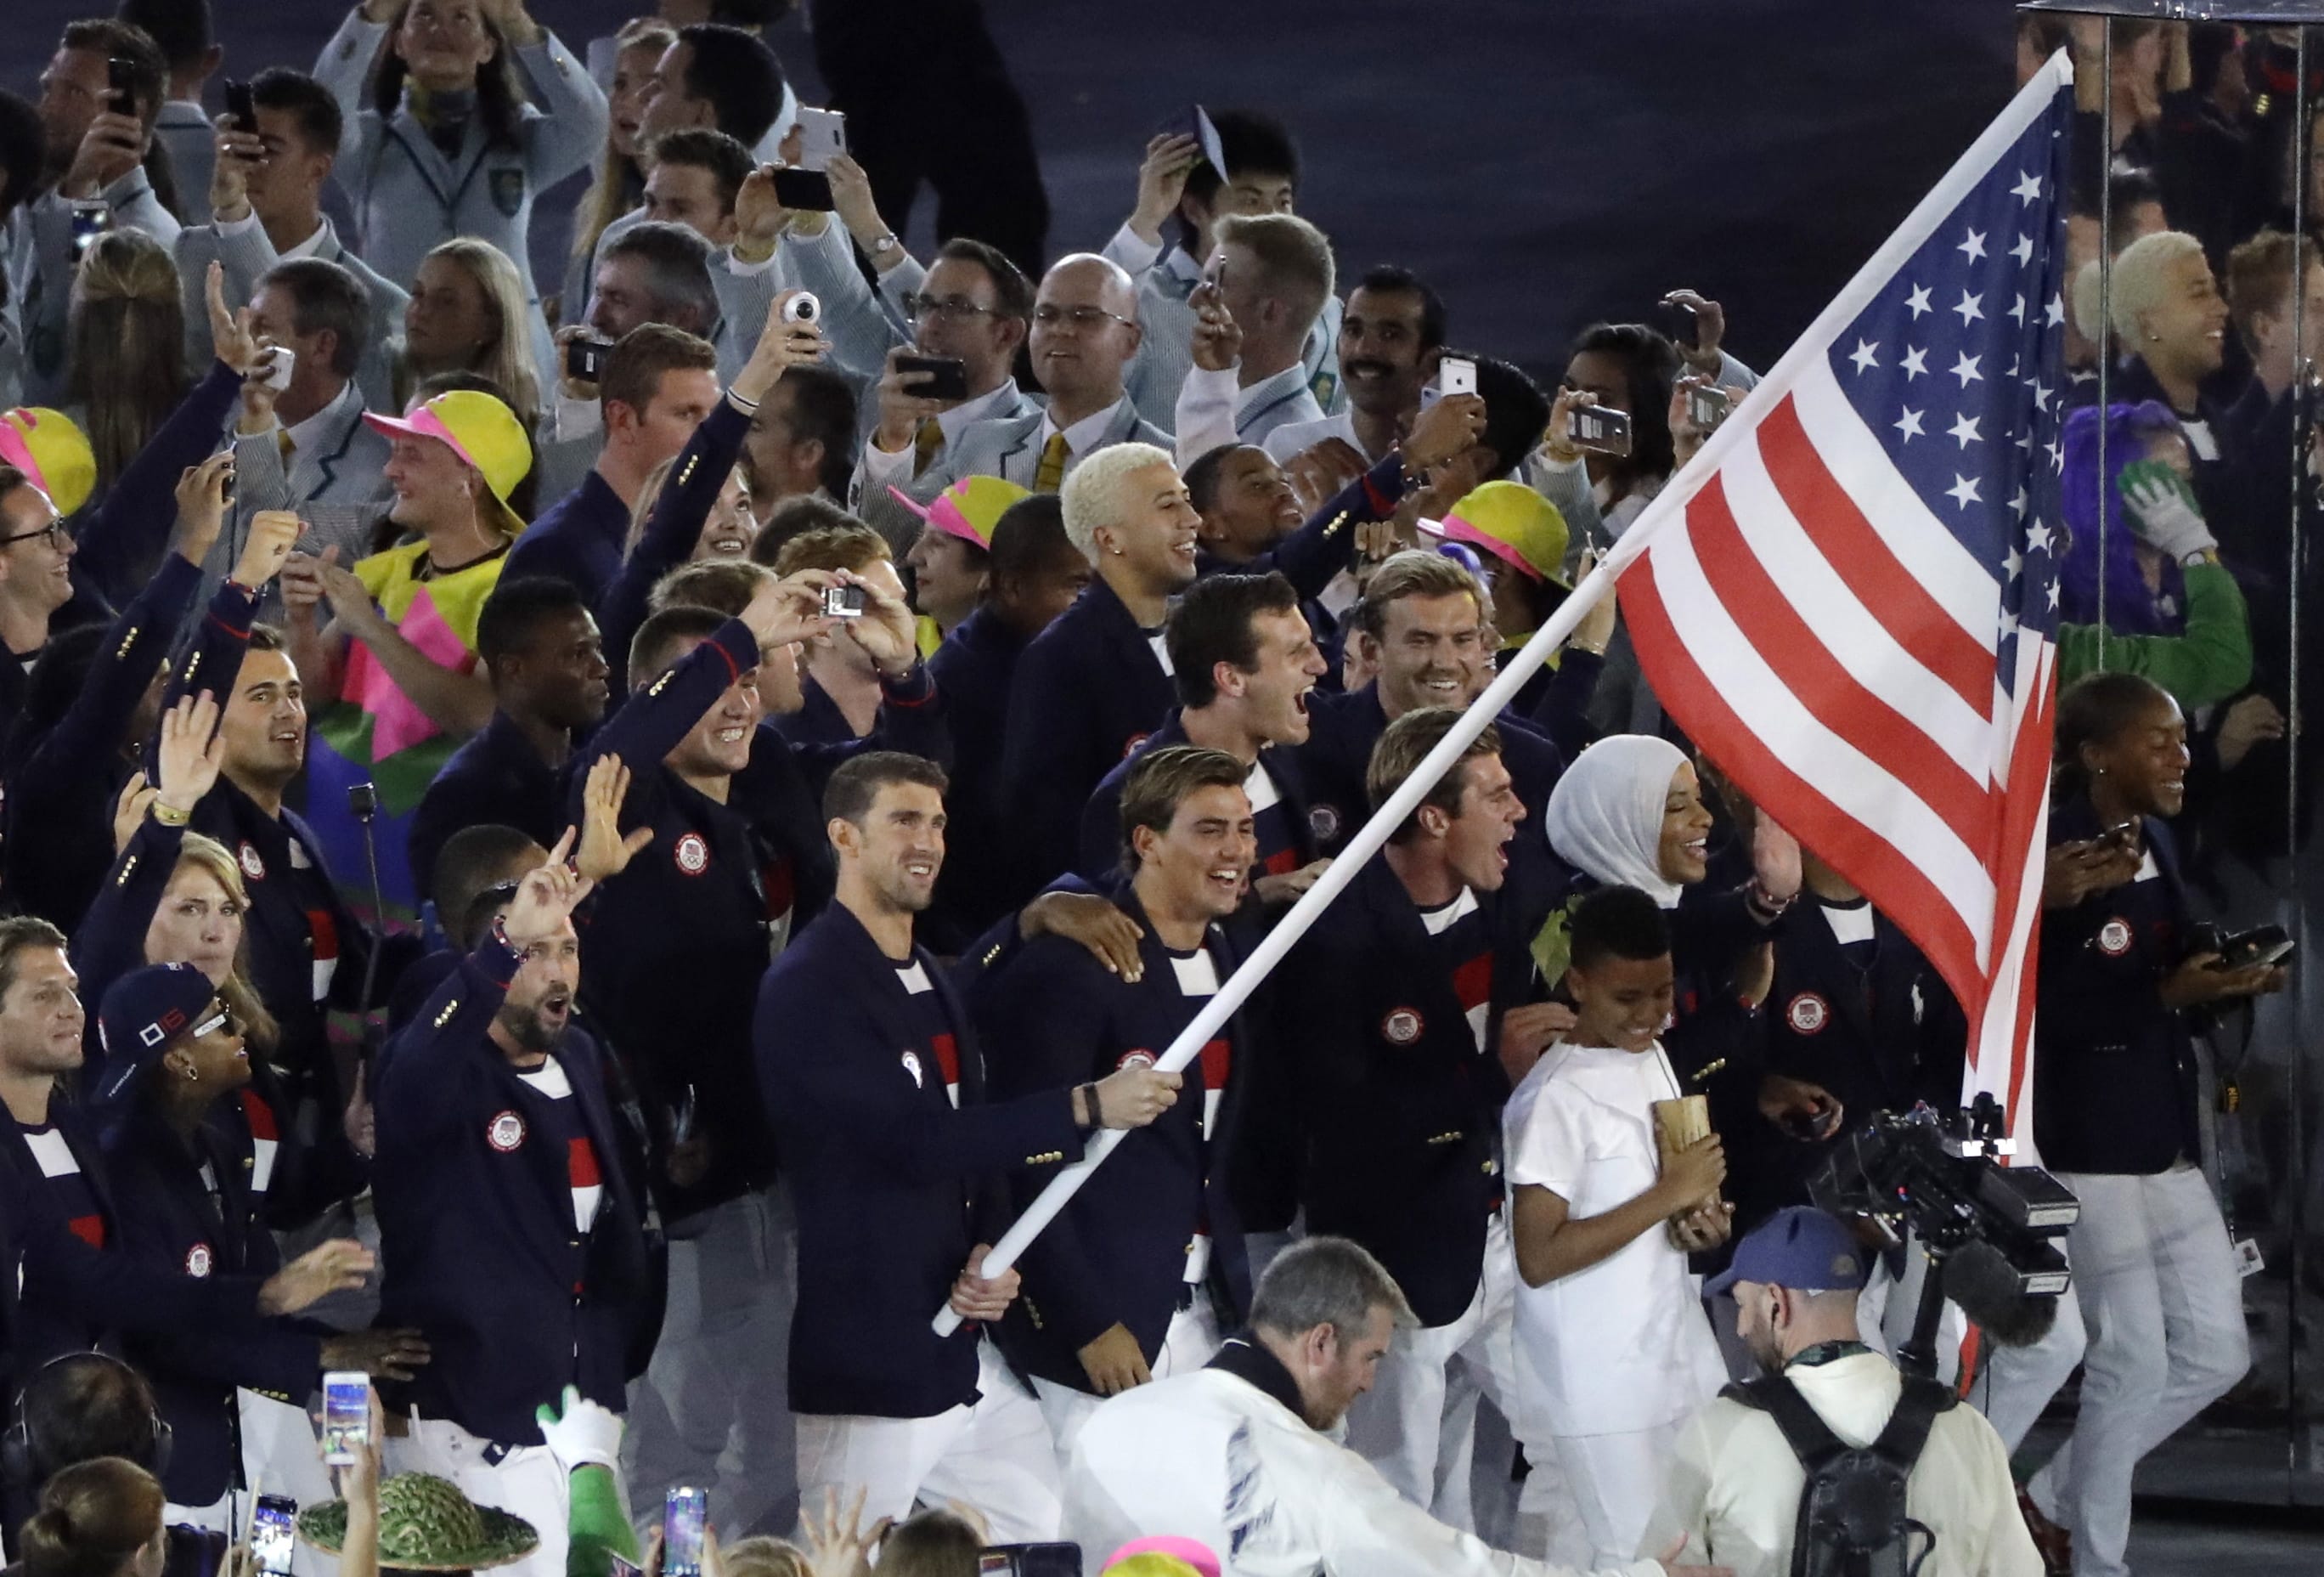 Michael Phelps carries the flag of the United States during the opening ceremony for the 2016 Summer Olympics in Rio de Janeiro, Brazil, Friday, Aug. 5, 2016. (AP Photo/Jae C.